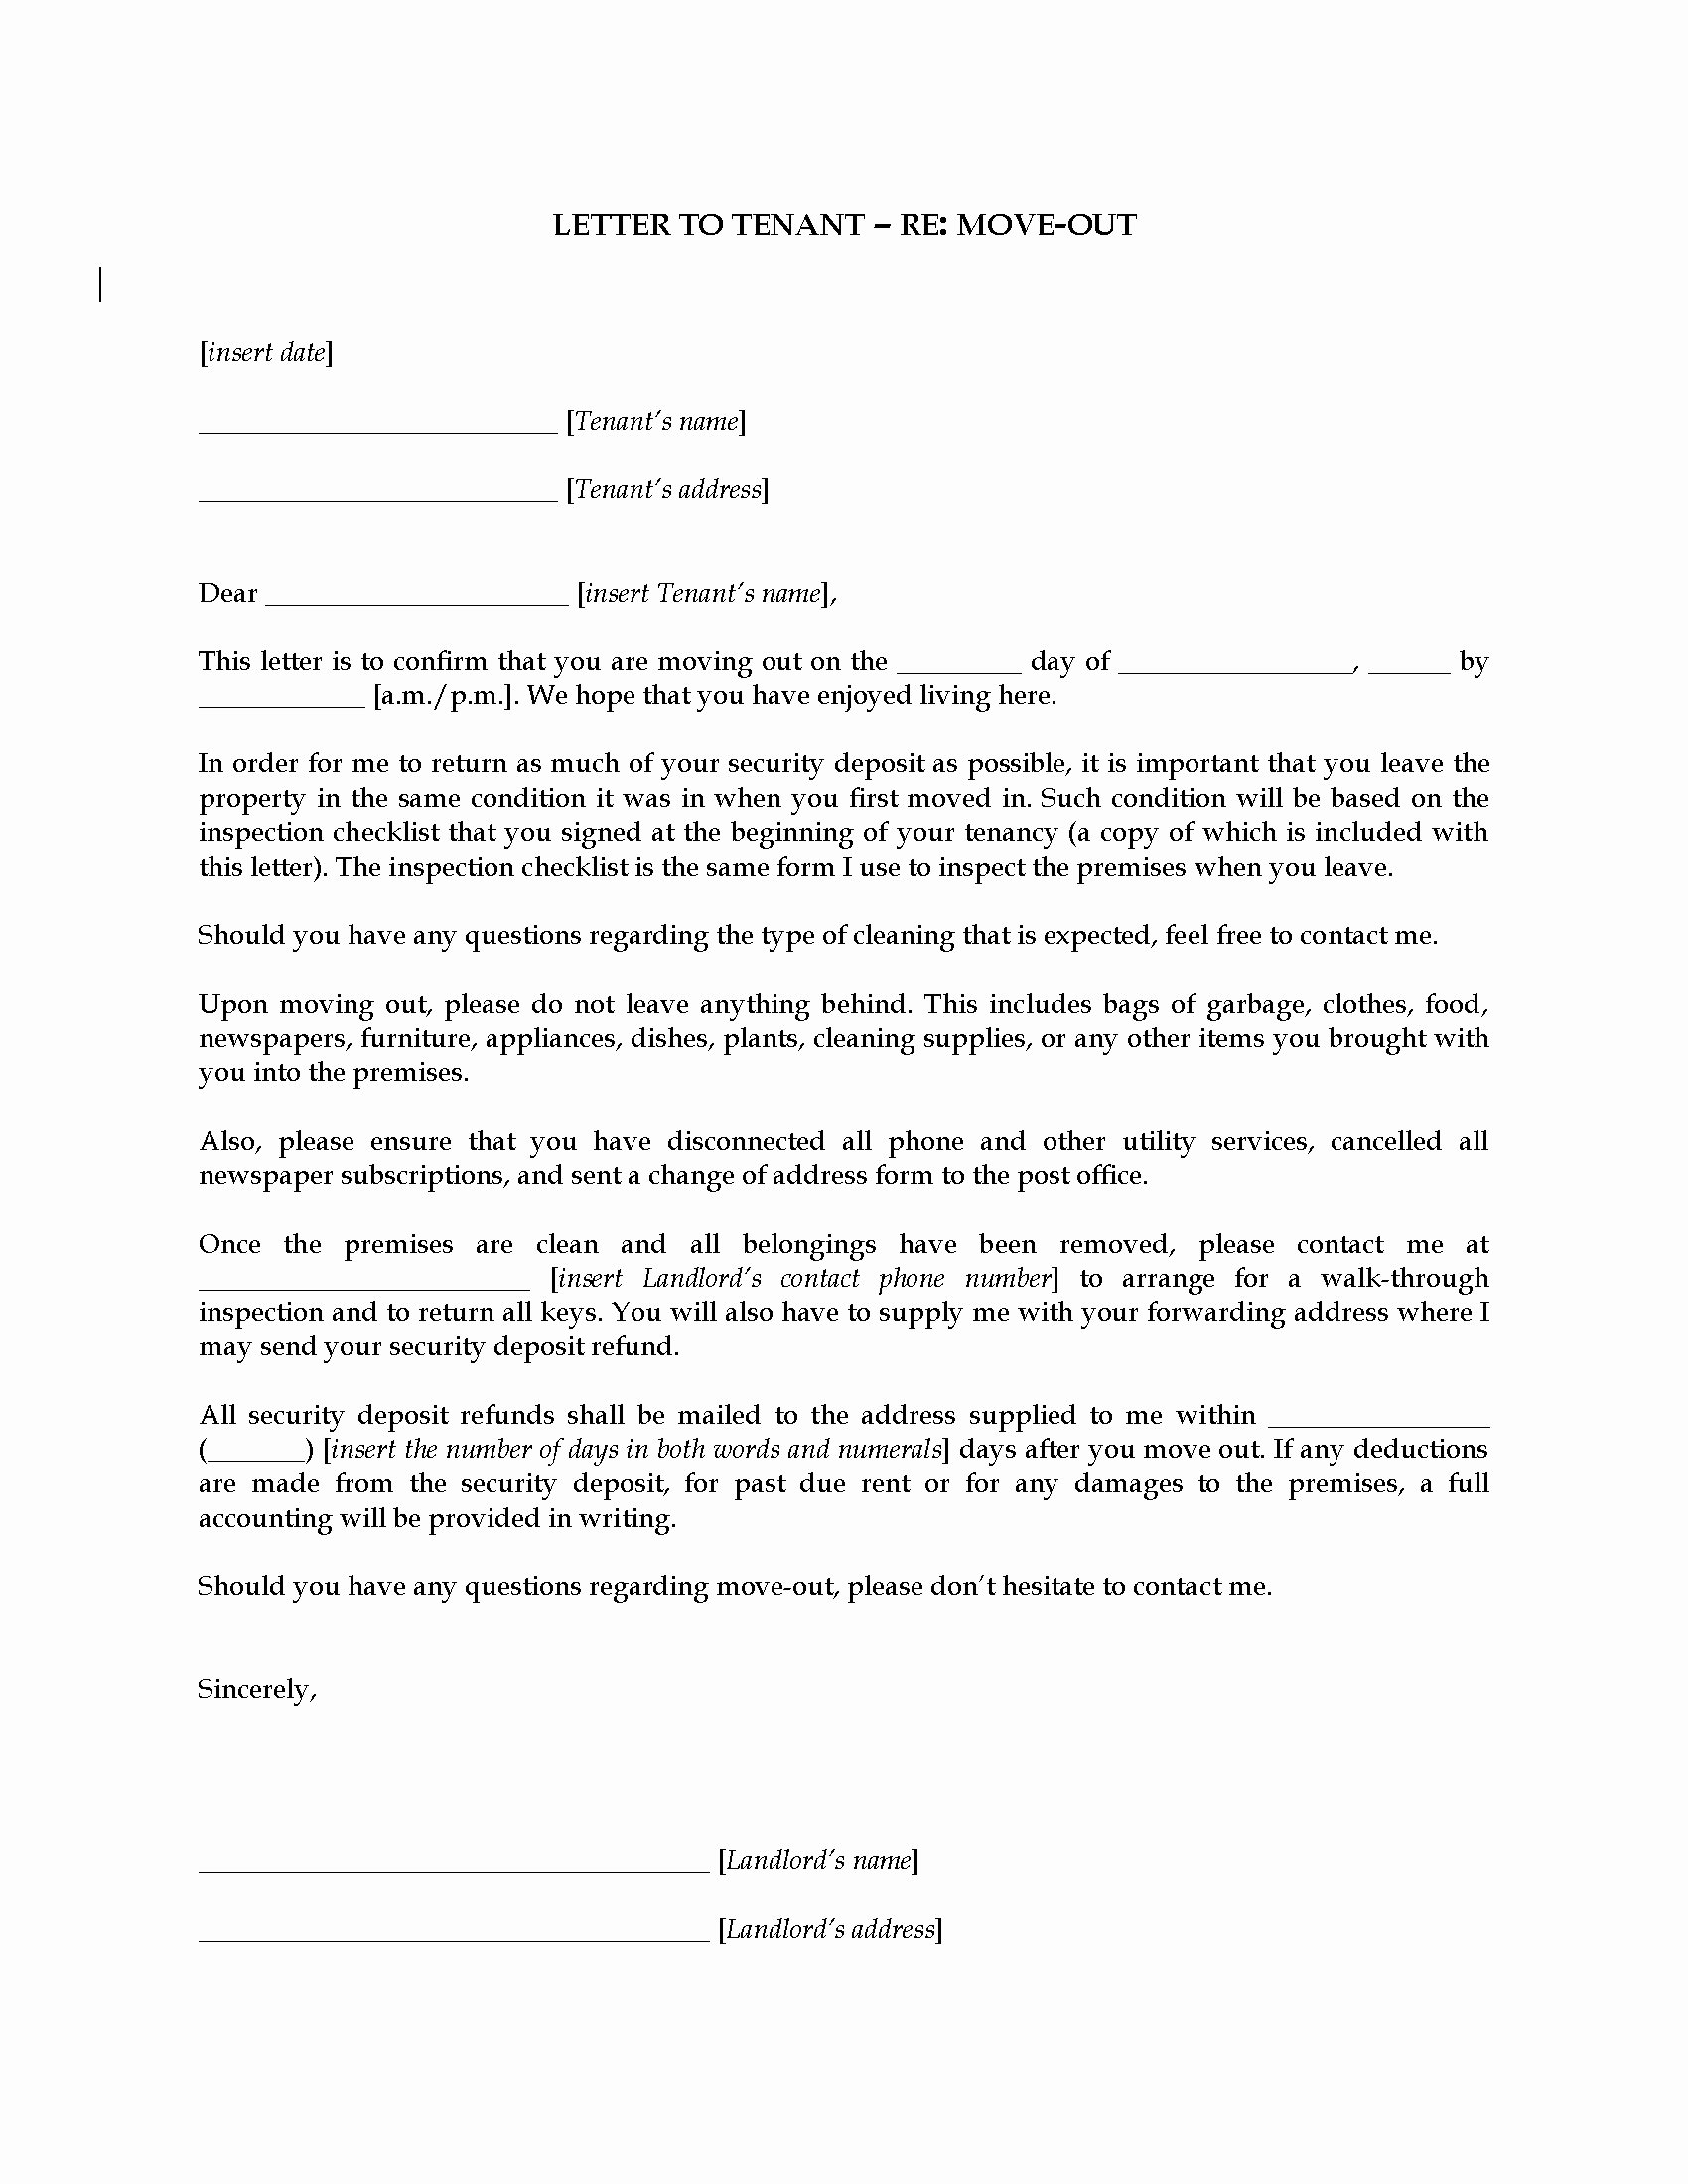 Tenant Move Out Letter Luxury Landlord Letter to Tenant Re Moving Out